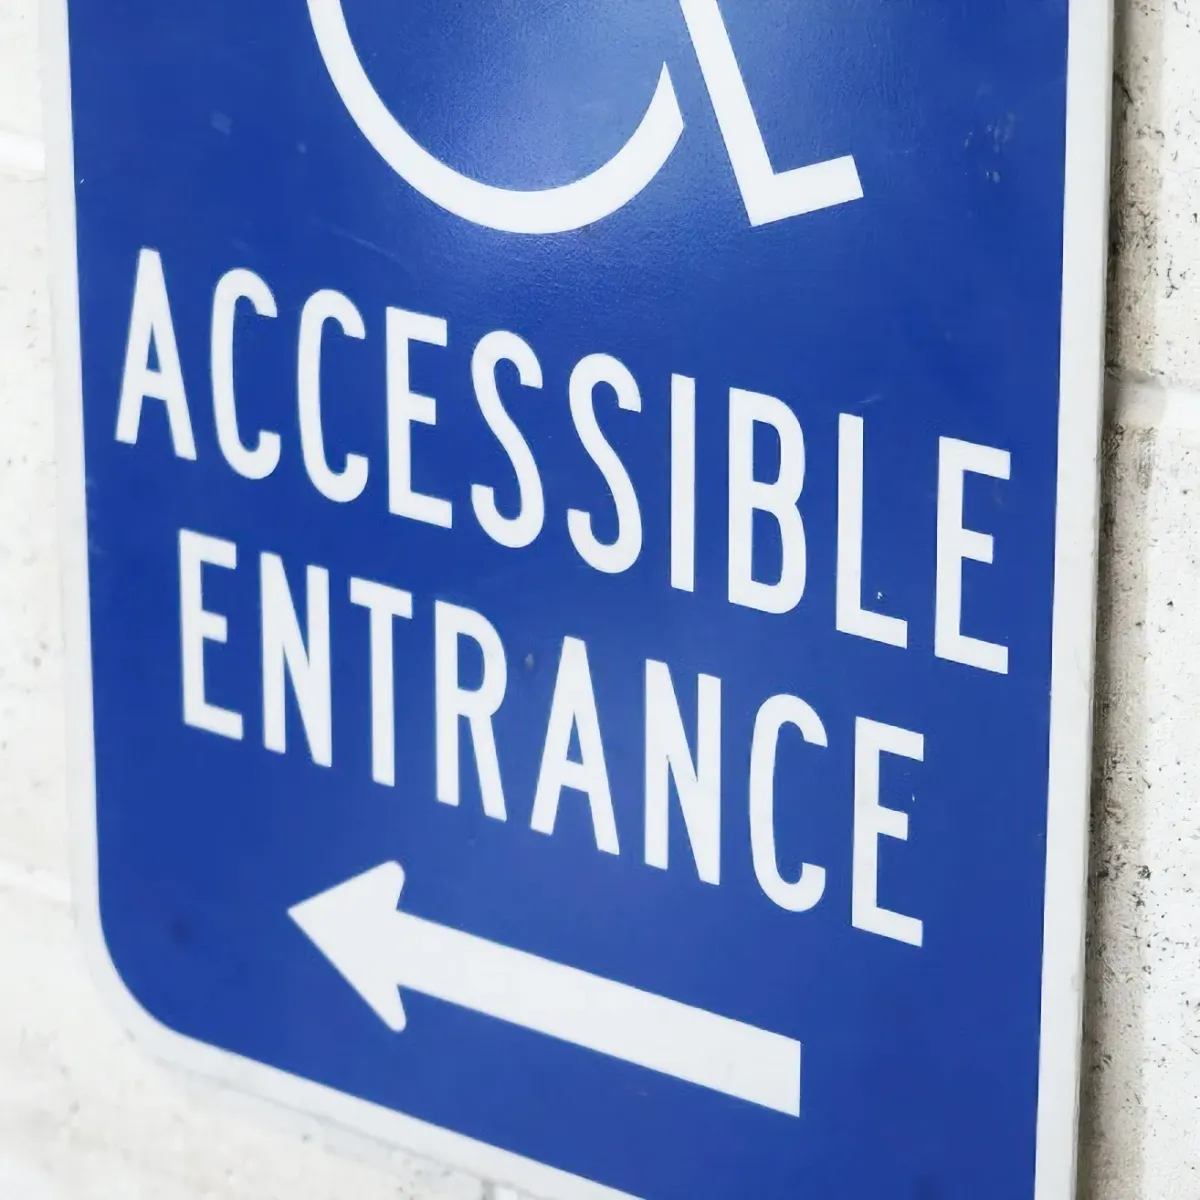 ACCESSIBLE ENTRANCE メタルサイン